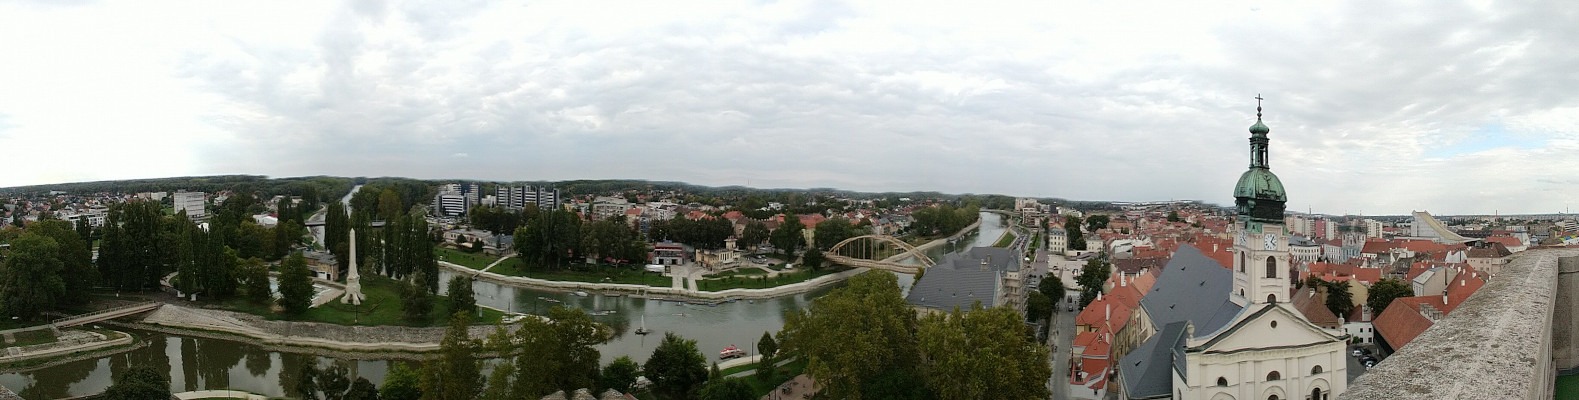 panorama of Győr including the river, the old town, and the newer development